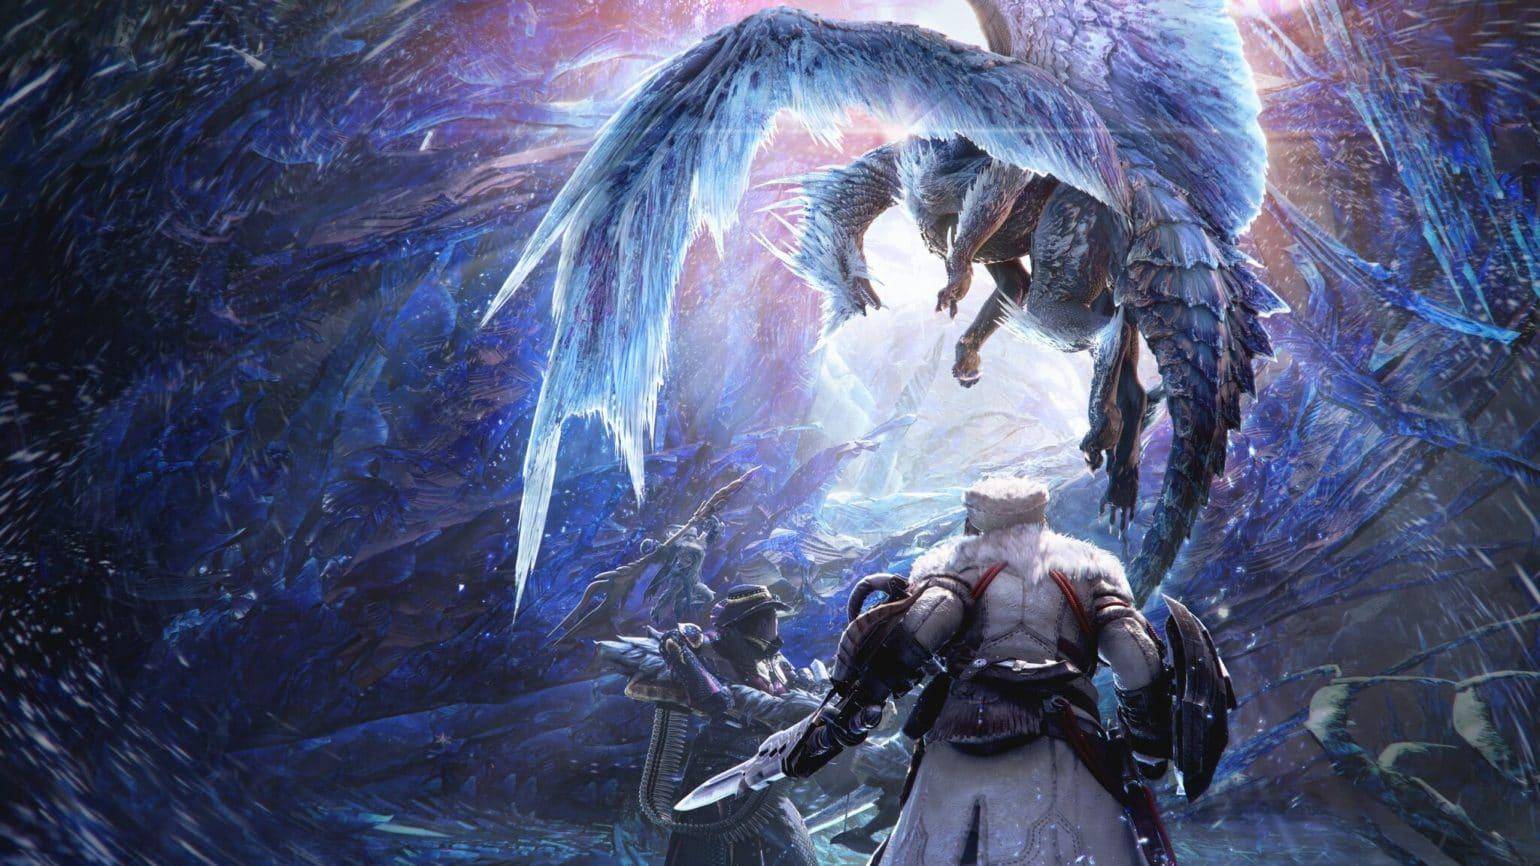 Monster Hunter World: Iceborne is coming to PC early 2020